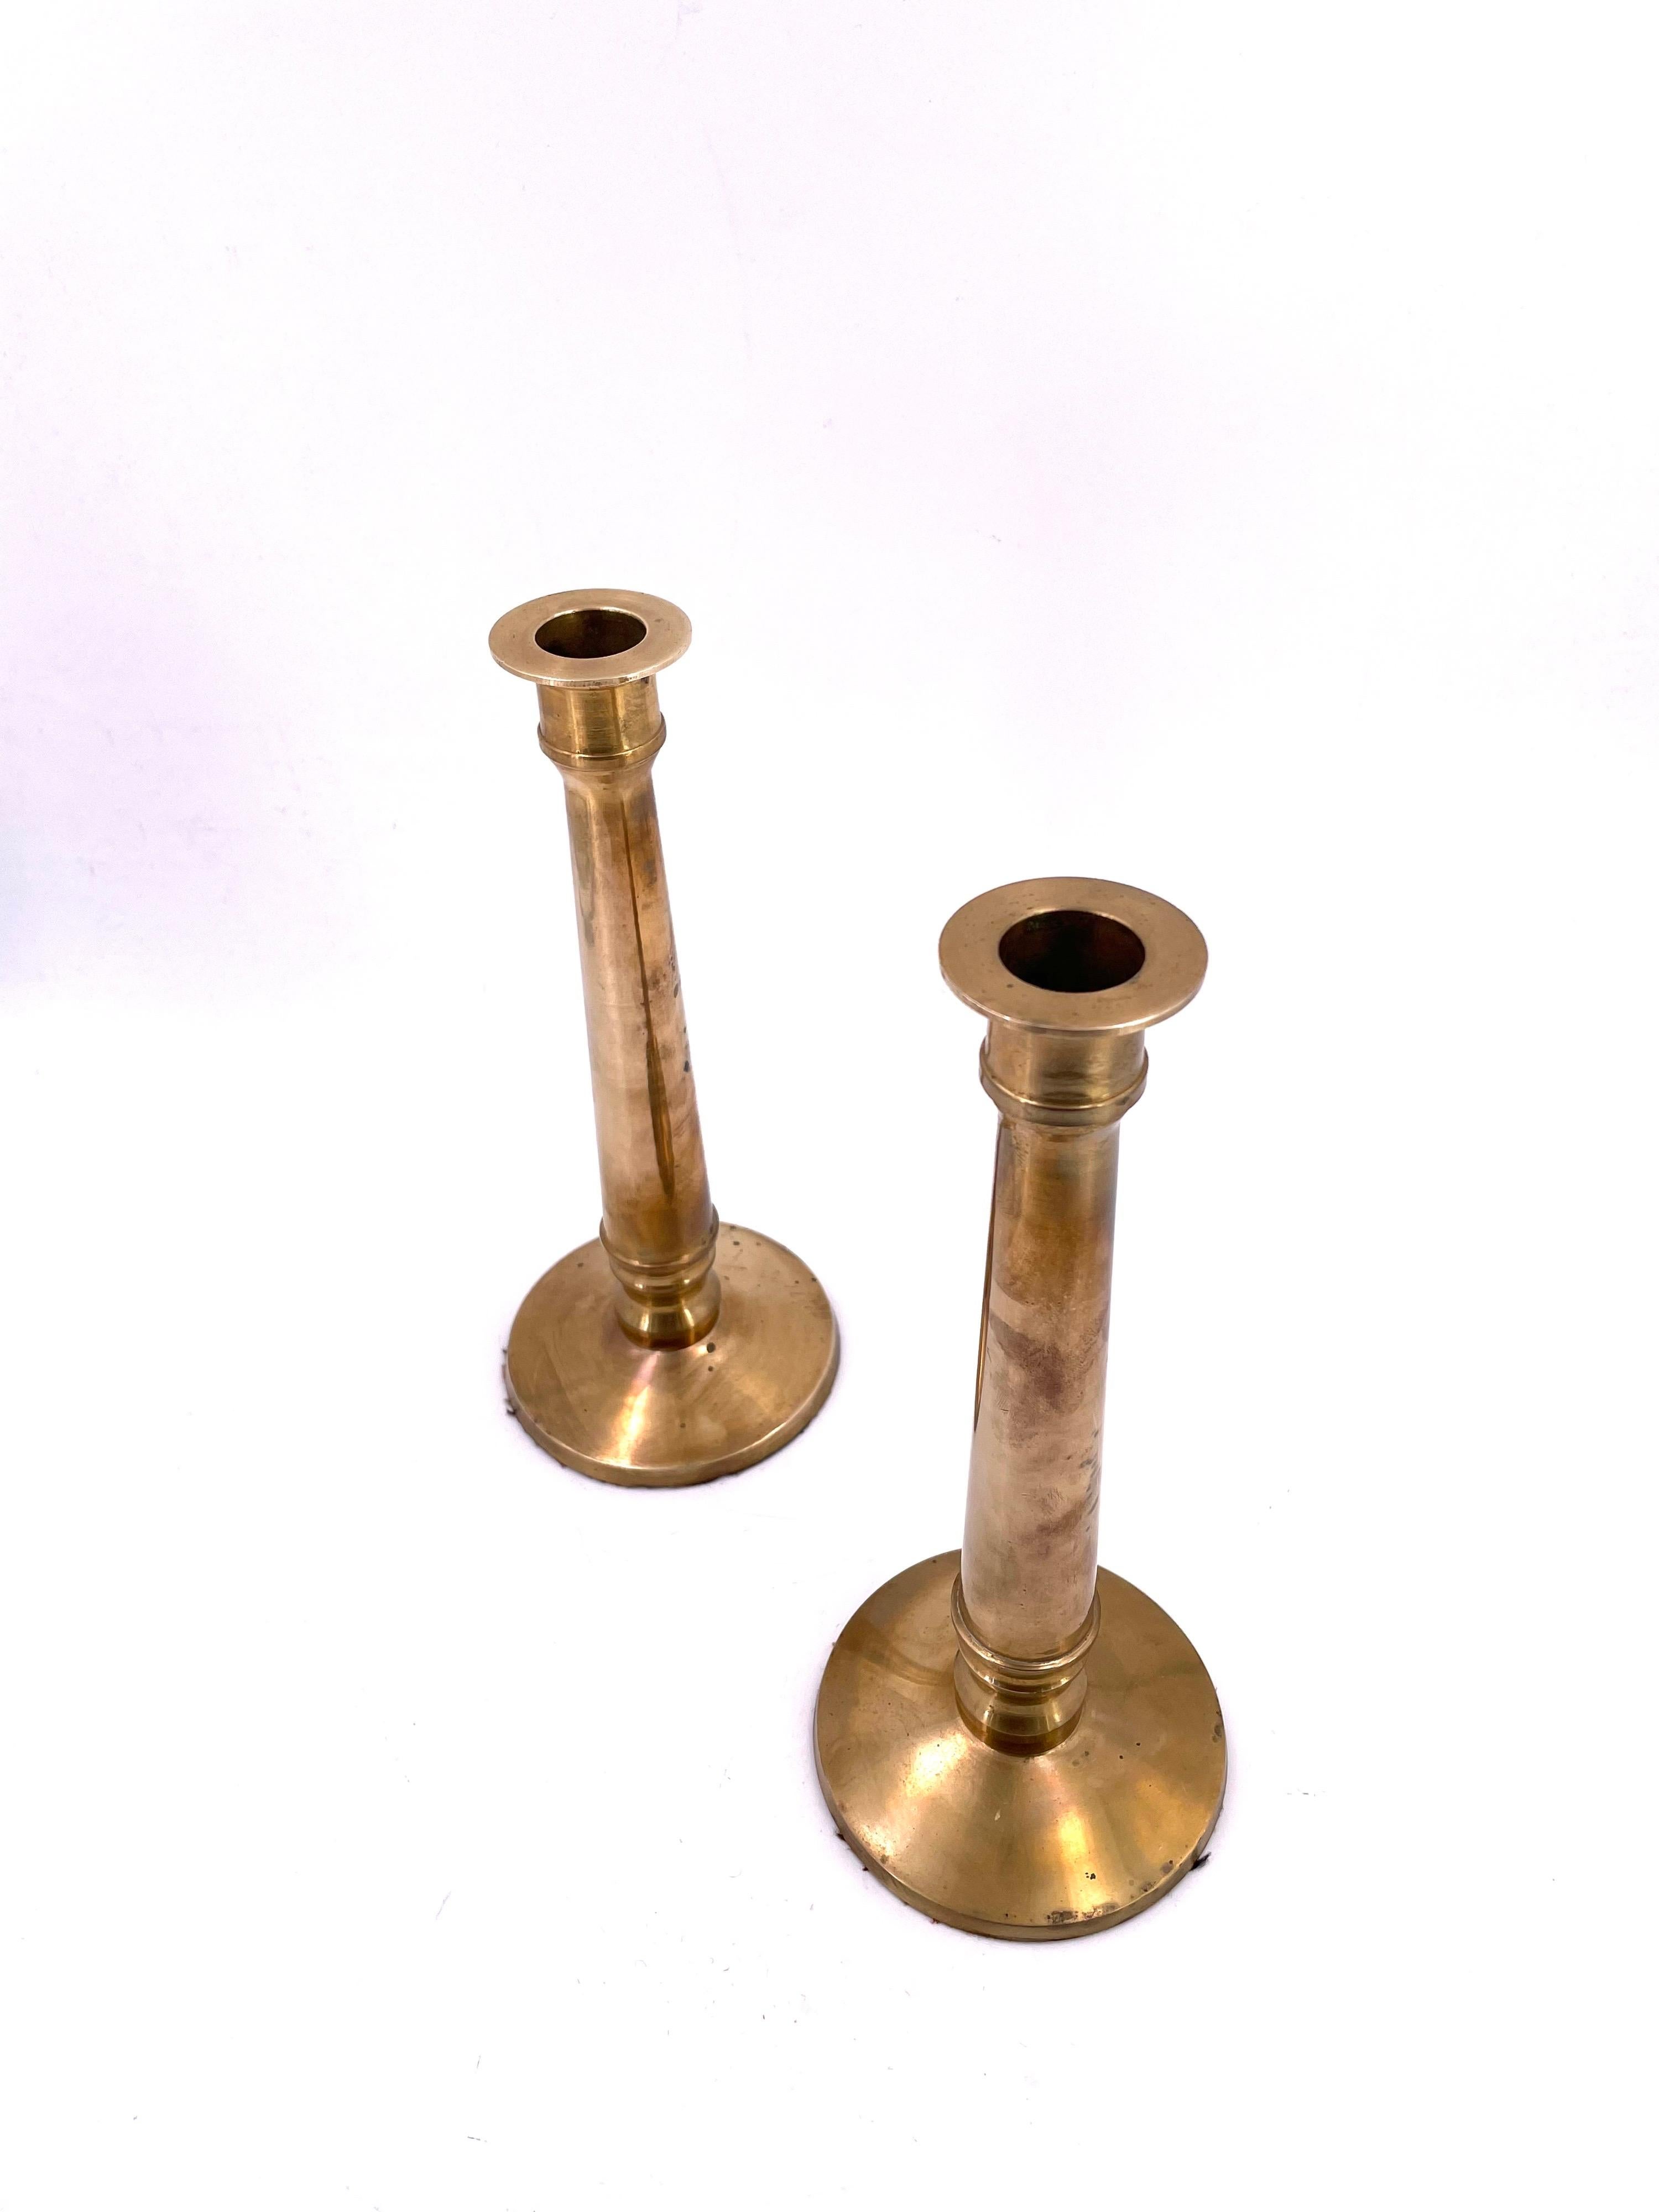 North American Tall Pair of Hollywood Regency Solid Brass Candle Holders by Ralph Lauren